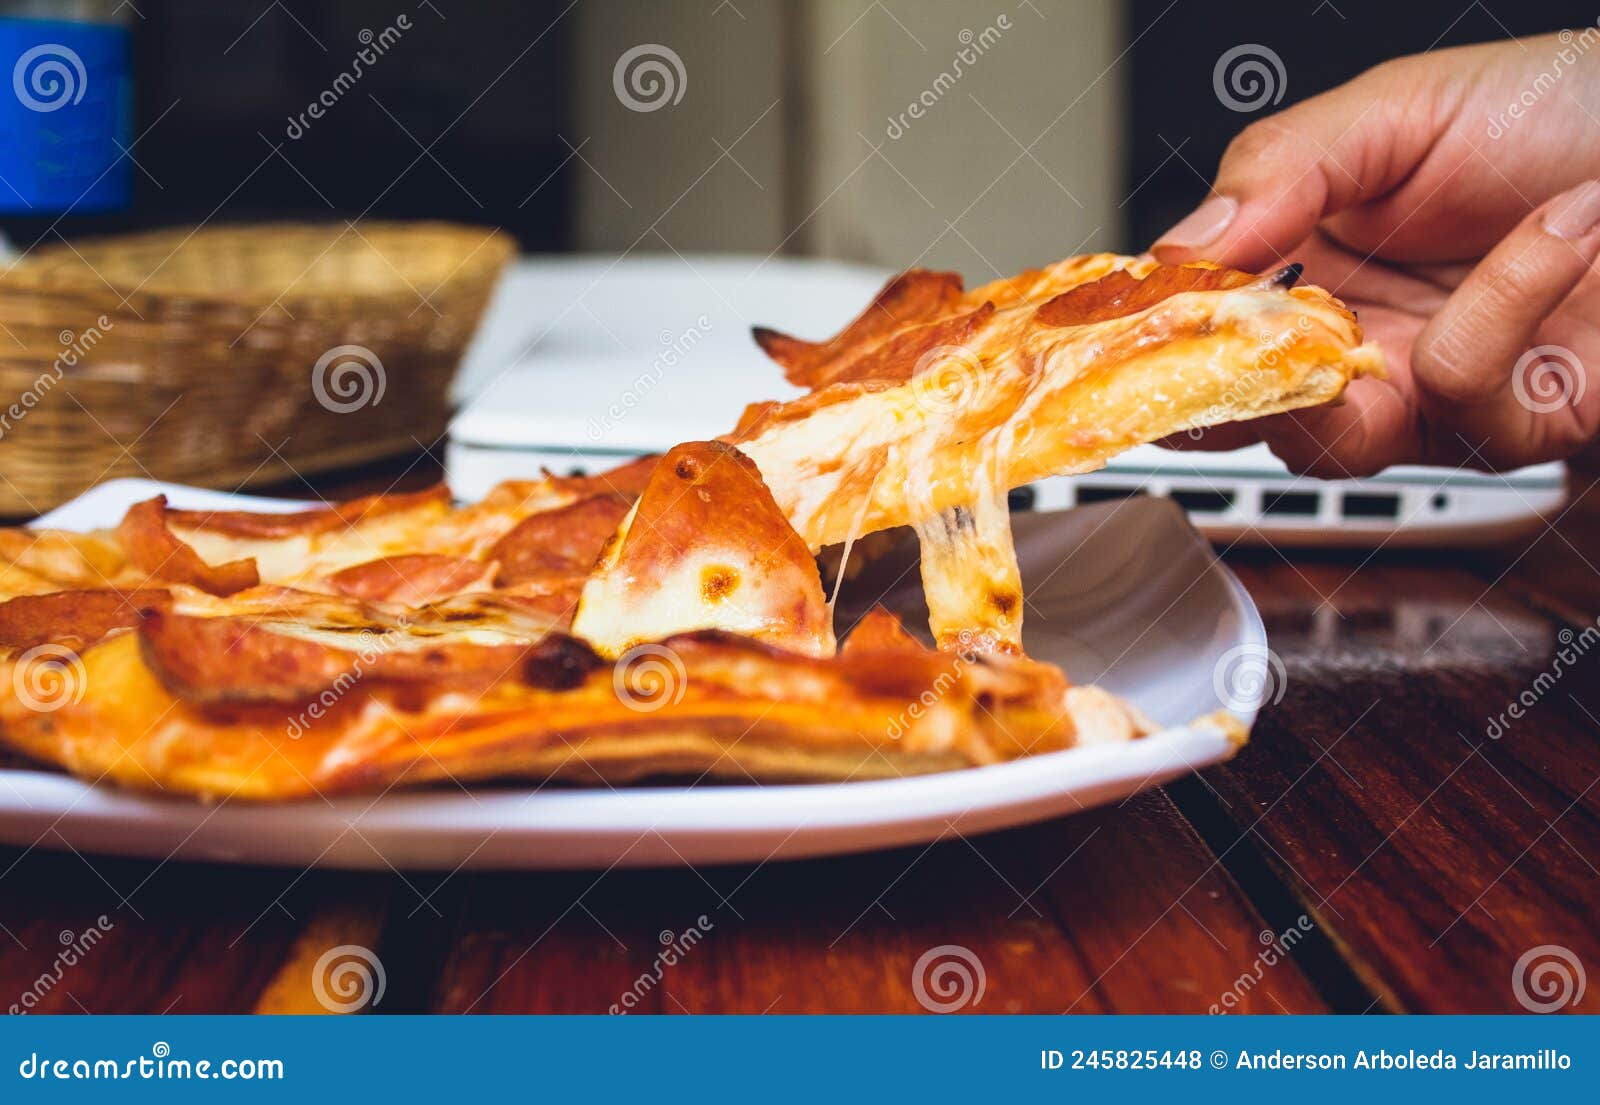 person's hand holding piece of pizza in restaurant